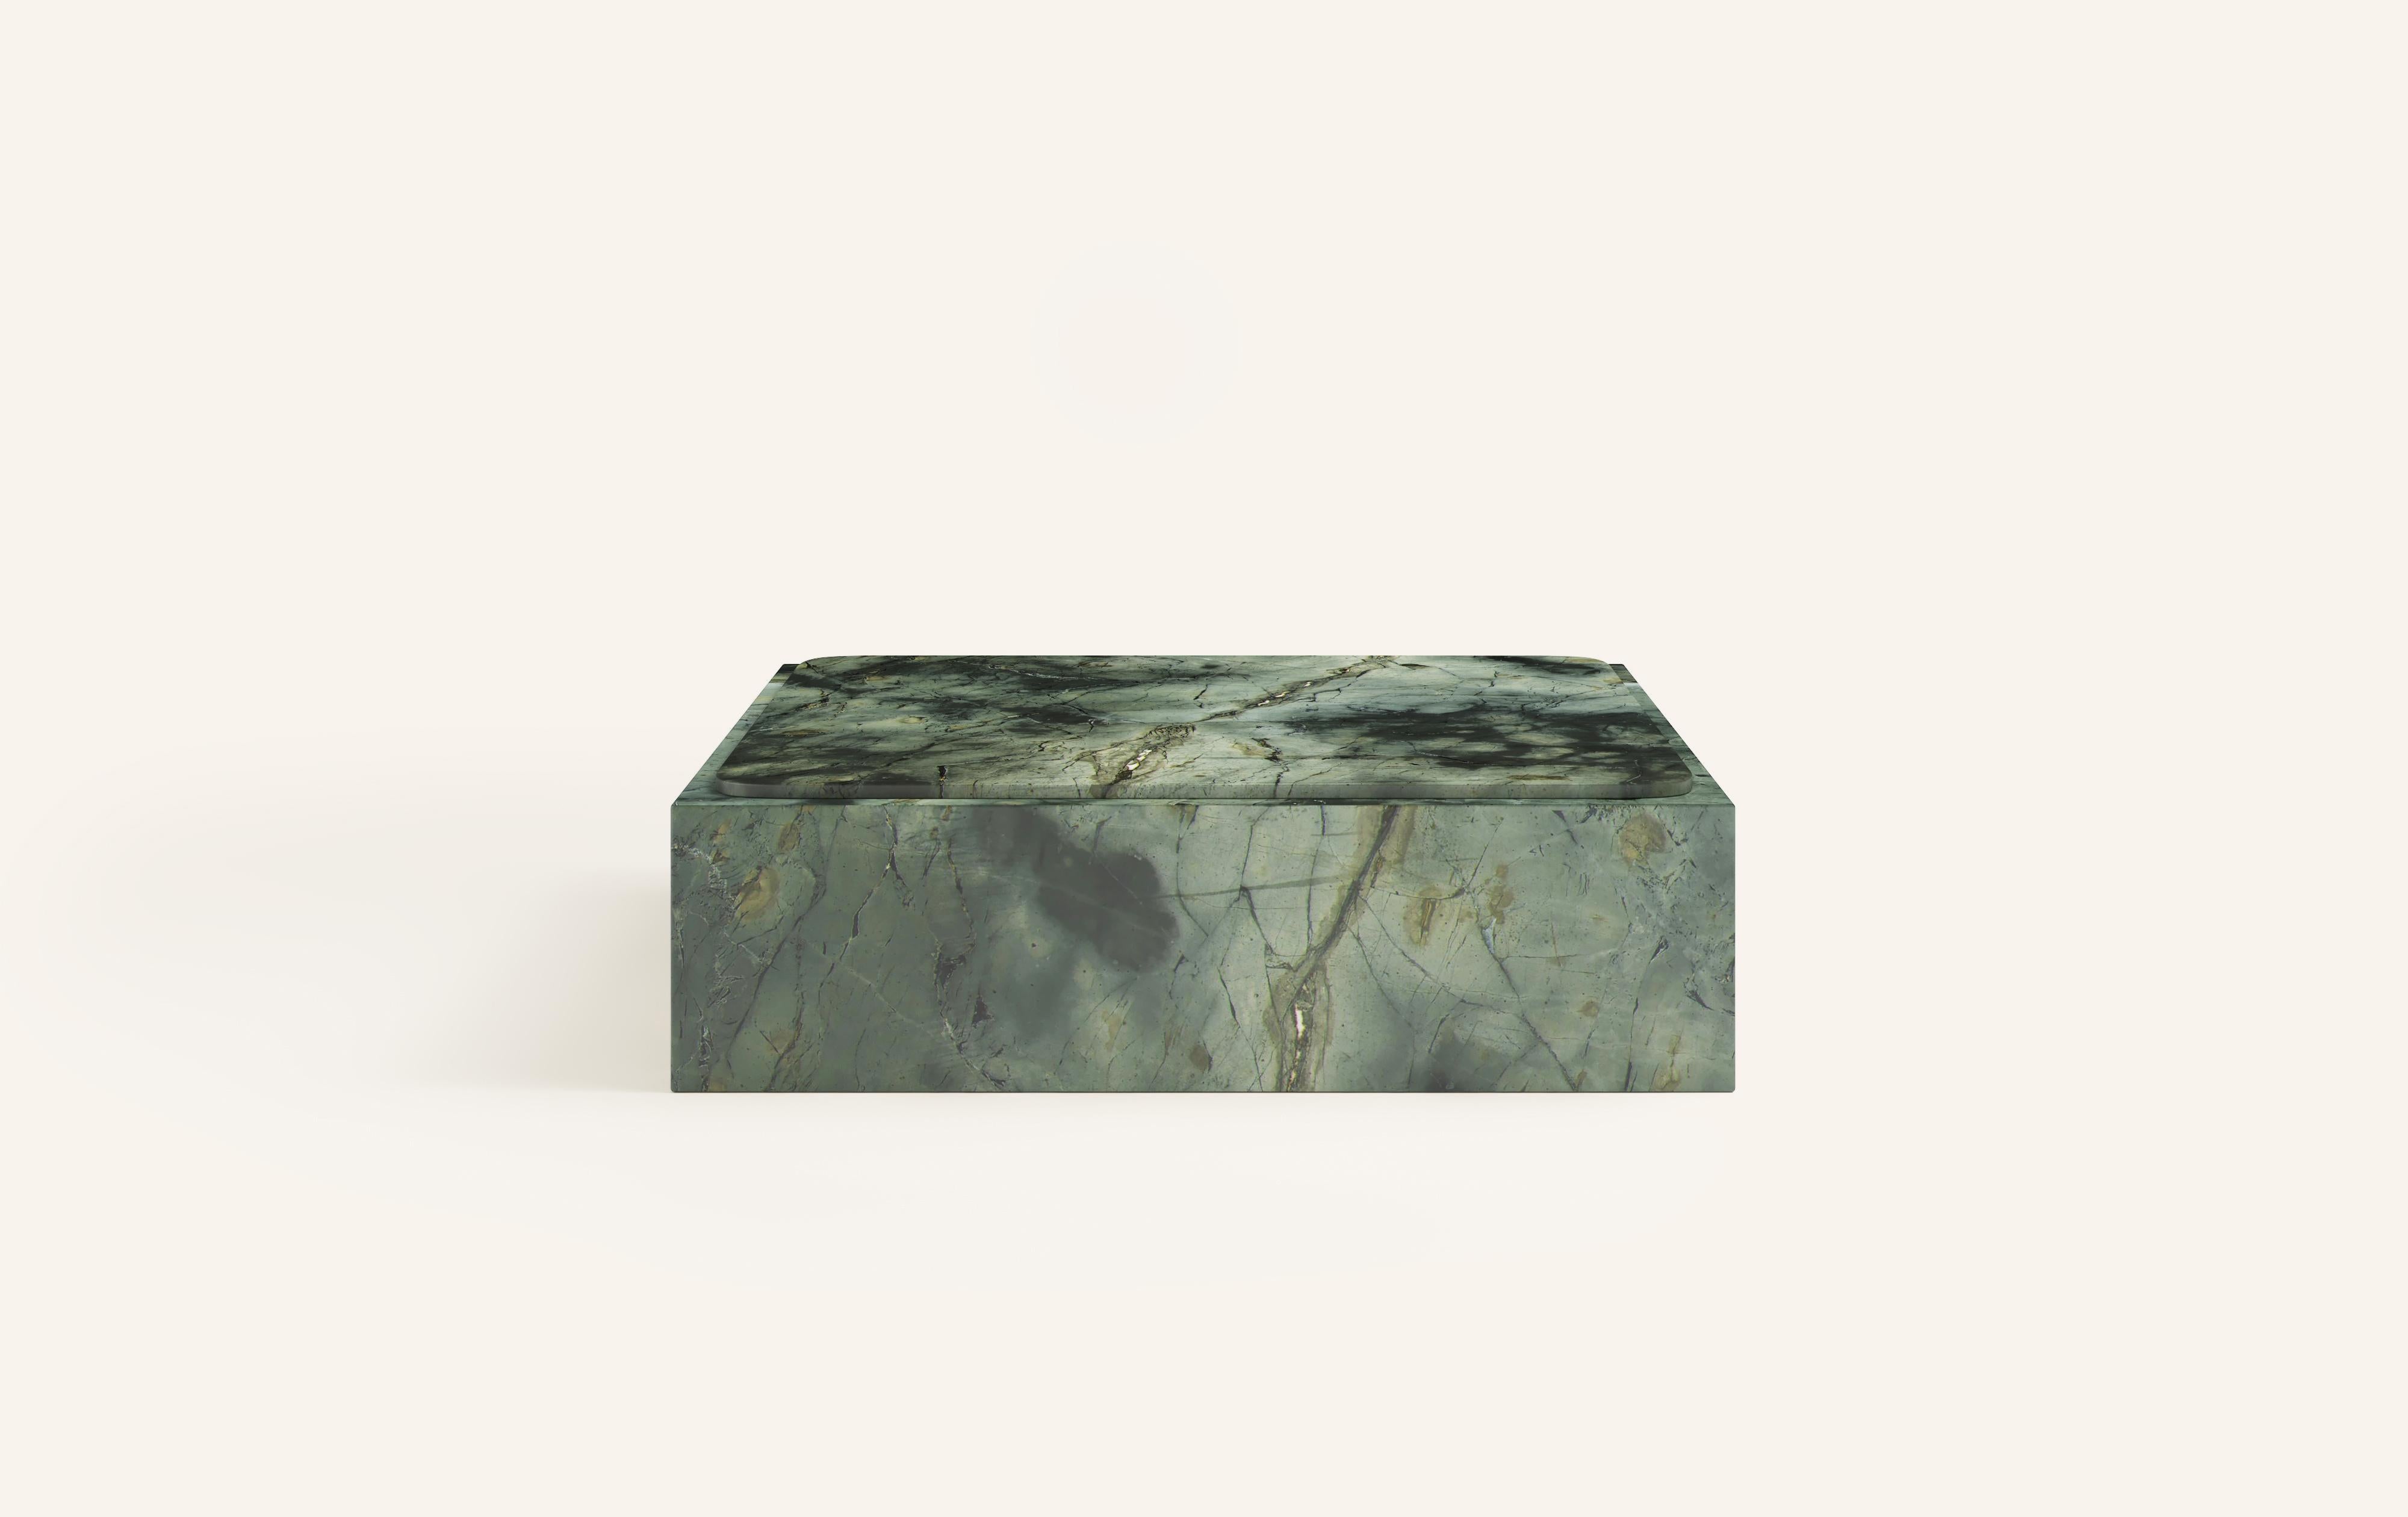 MONOLITHIC FORMS SOFTENED BY GENTLE EDGES. WITH ITS BOLD MARBLE PATTERNS CUBO IS AS VERSATILE AS IT IS STRIKING.

DIMENSIONS:
54”L x 54”W x 13”H: 
- 3/4